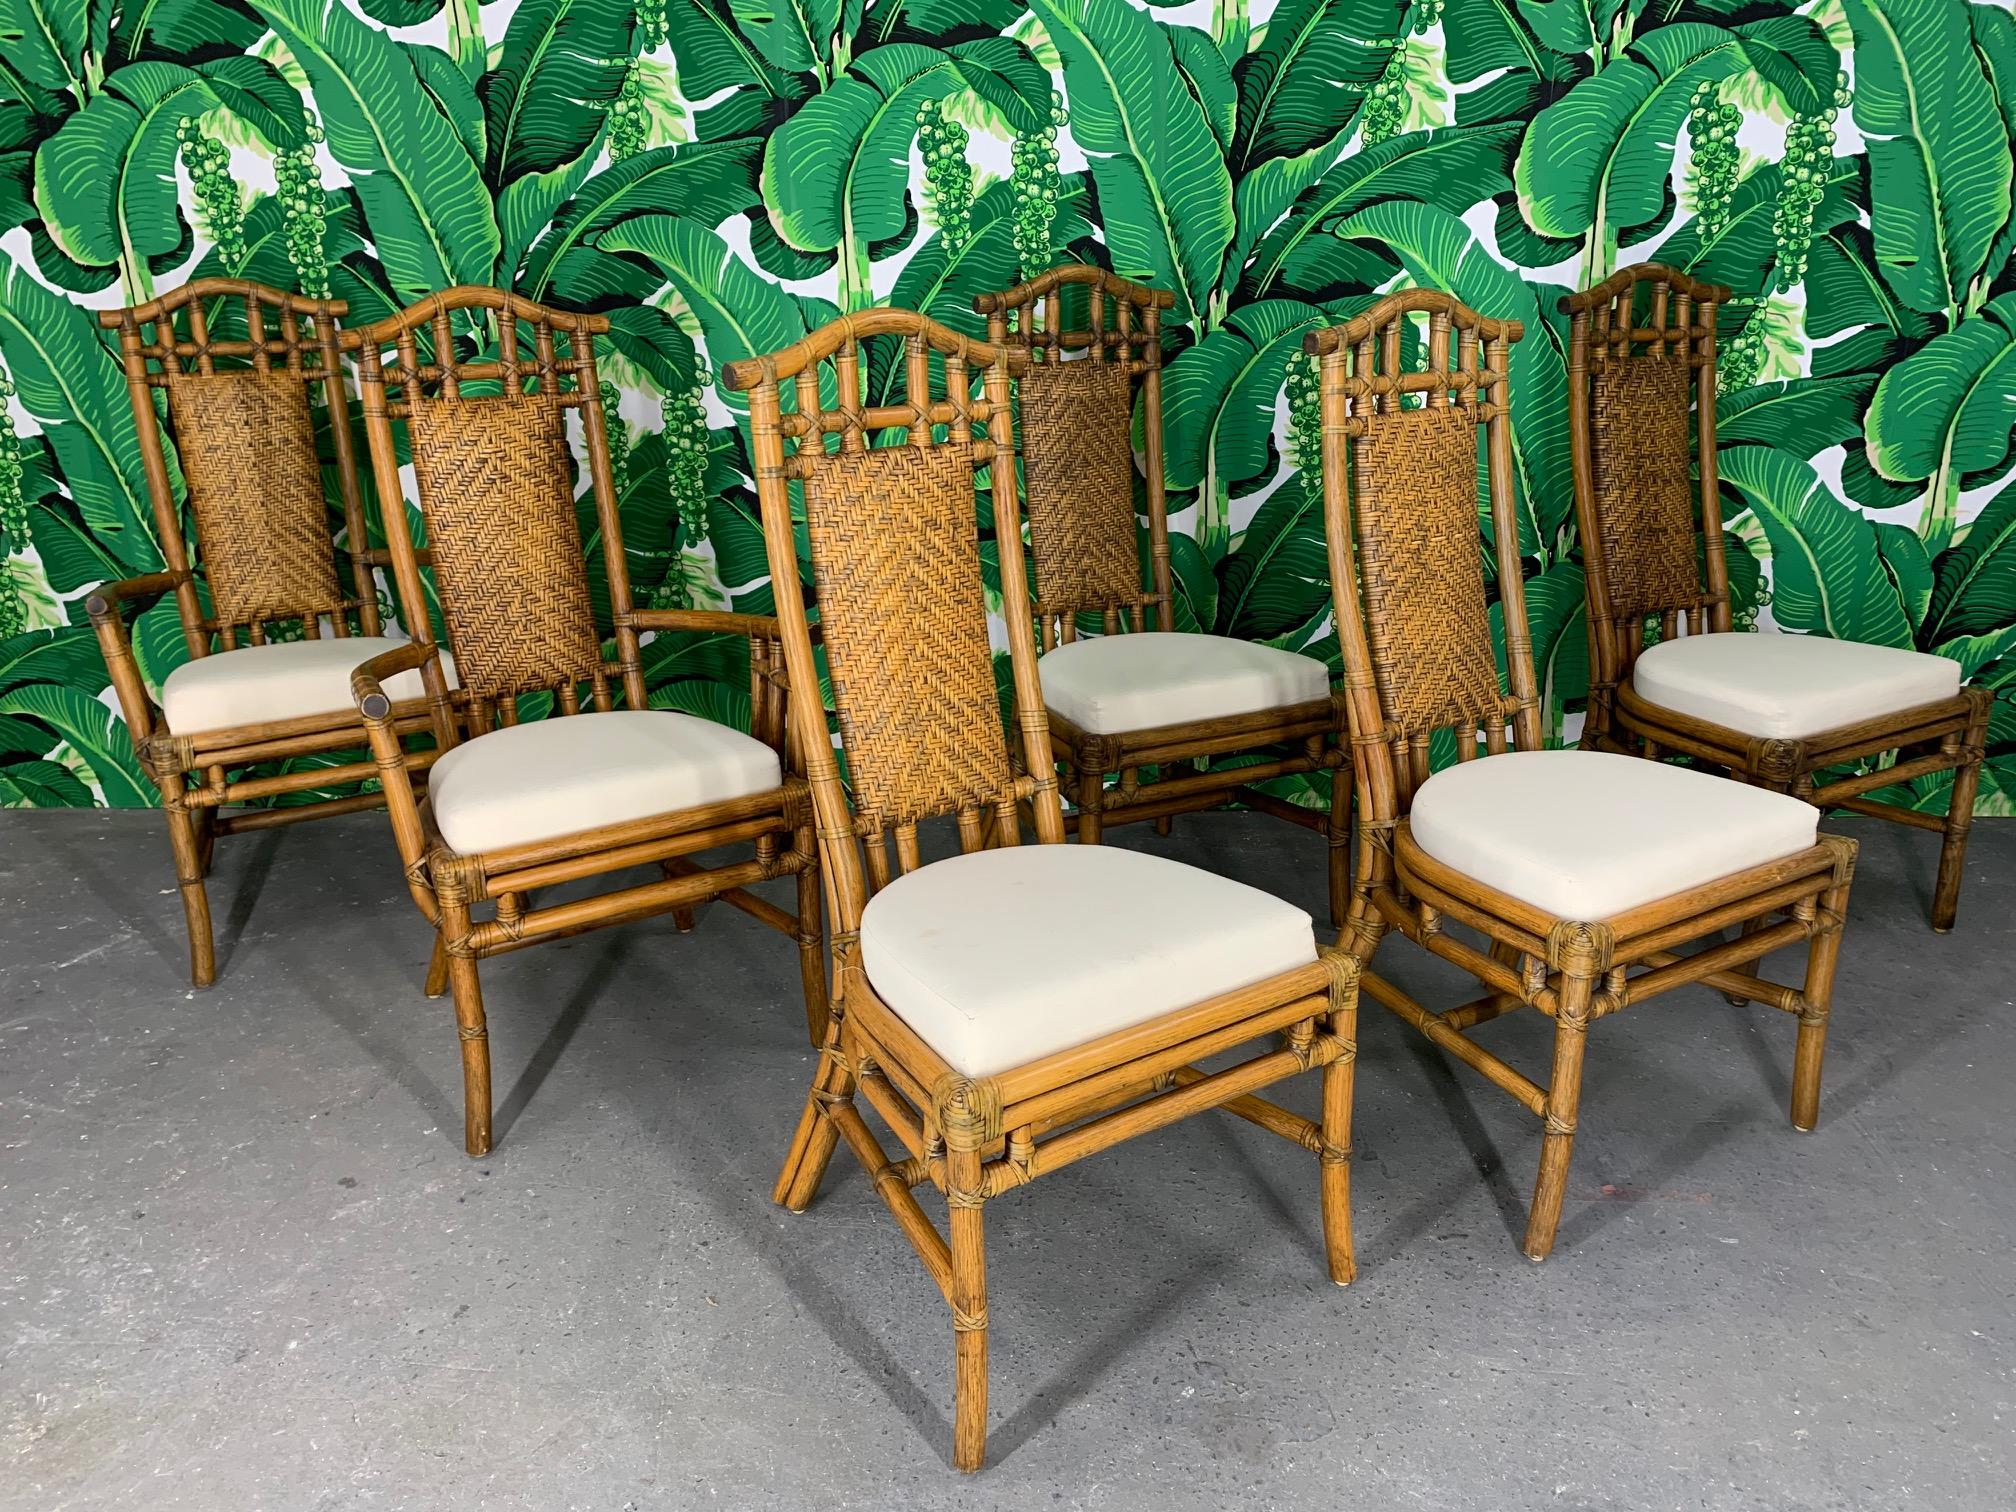 Set of 6 McGuire bamboo pagoda high back dining chairs feature woven rattan cushioned backs and upholstered seats. Very good condition with minor imperfections consistent with age. Some light staining on seats.